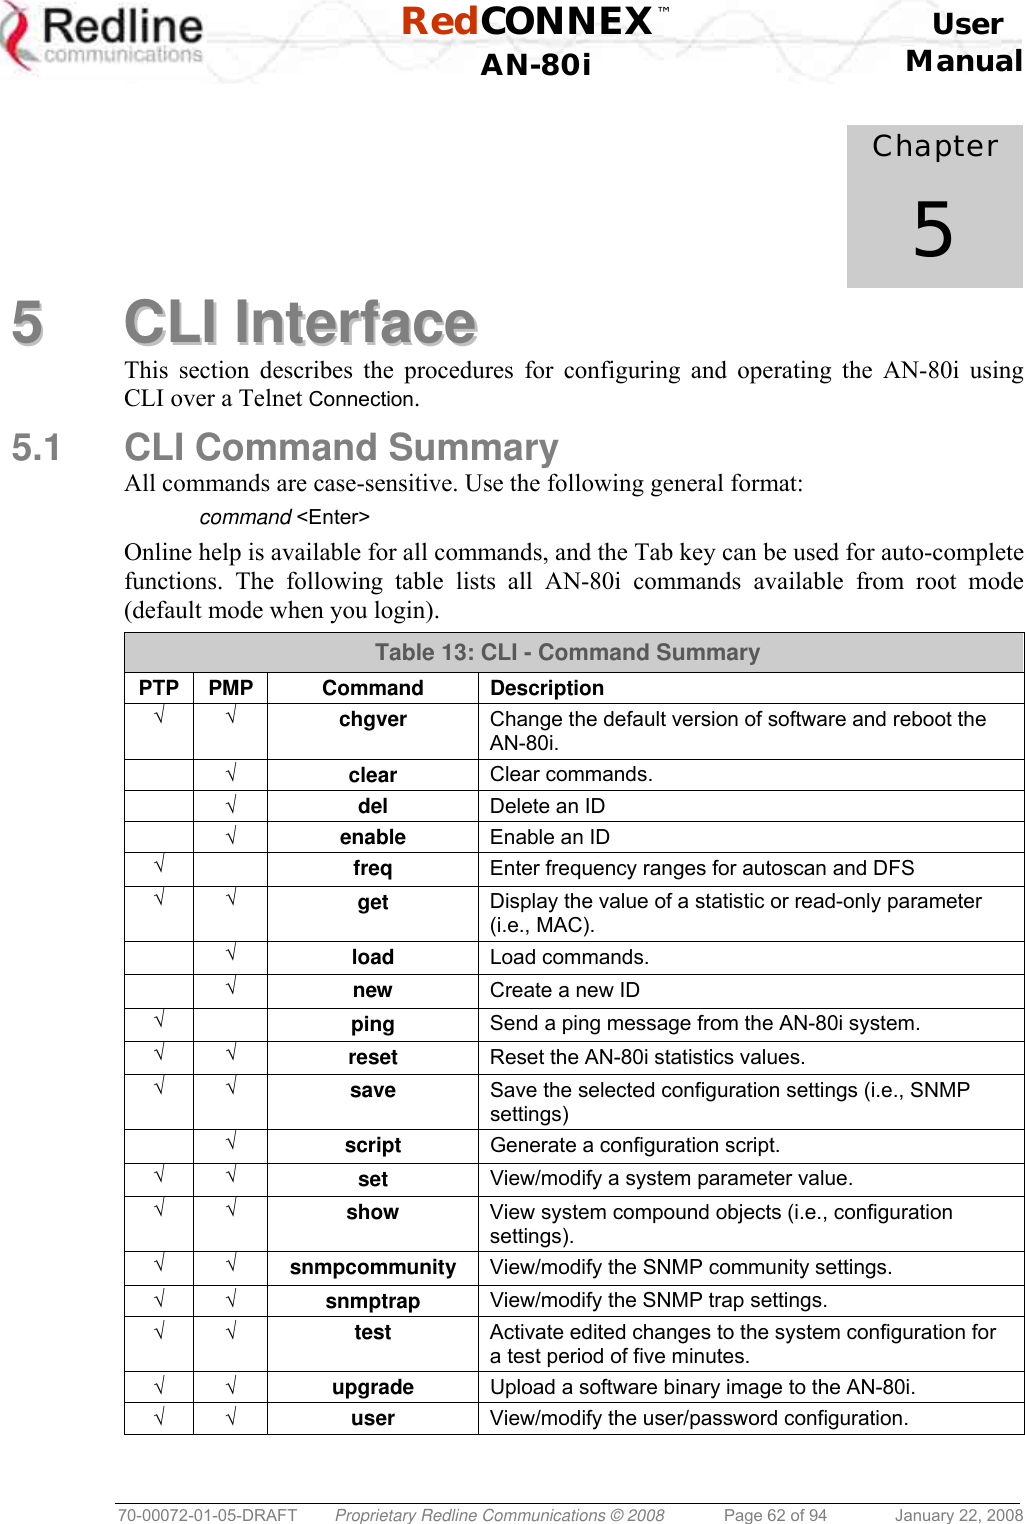  RedCONNEX™    User  AN-80i Manual  70-00072-01-05-DRAFT  Proprietary Redline Communications © 2008  Page 62 of 94  January 22, 2008             Chapter 5 55  CCLLII  IInntteerrffaaccee  This section describes the procedures for configuring and operating the AN-80i using CLI over a Telnet Connection. 5.1  CLI Command Summary All commands are case-sensitive. Use the following general format:  command &lt;Enter&gt; Online help is available for all commands, and the Tab key can be used for auto-complete functions. The following table lists all AN-80i commands available from root mode (default mode when you login). Table 13: CLI - Command Summary PTP PMP  Command  Description √ √ chgver  Change the default version of software and reboot the AN-80i.  √ clear  Clear commands.  √ del  Delete an ID  √ enable  Enable an ID √   freq  Enter frequency ranges for autoscan and DFS √ √ get  Display the value of a statistic or read-only parameter (i.e., MAC).   √ load  Load commands.  √ new  Create a new ID √   ping  Send a ping message from the AN-80i system. √ √ reset  Reset the AN-80i statistics values. √ √ save  Save the selected configuration settings (i.e., SNMP settings)  √ script  Generate a configuration script. √ √ set  View/modify a system parameter value. √ √ show  View system compound objects (i.e., configuration settings). √ √ snmpcommunity  View/modify the SNMP community settings. √ √ snmptrap  View/modify the SNMP trap settings. √ √ test  Activate edited changes to the system configuration for a test period of five minutes. √ √ upgrade  Upload a software binary image to the AN-80i. √ √ user  View/modify the user/password configuration.  